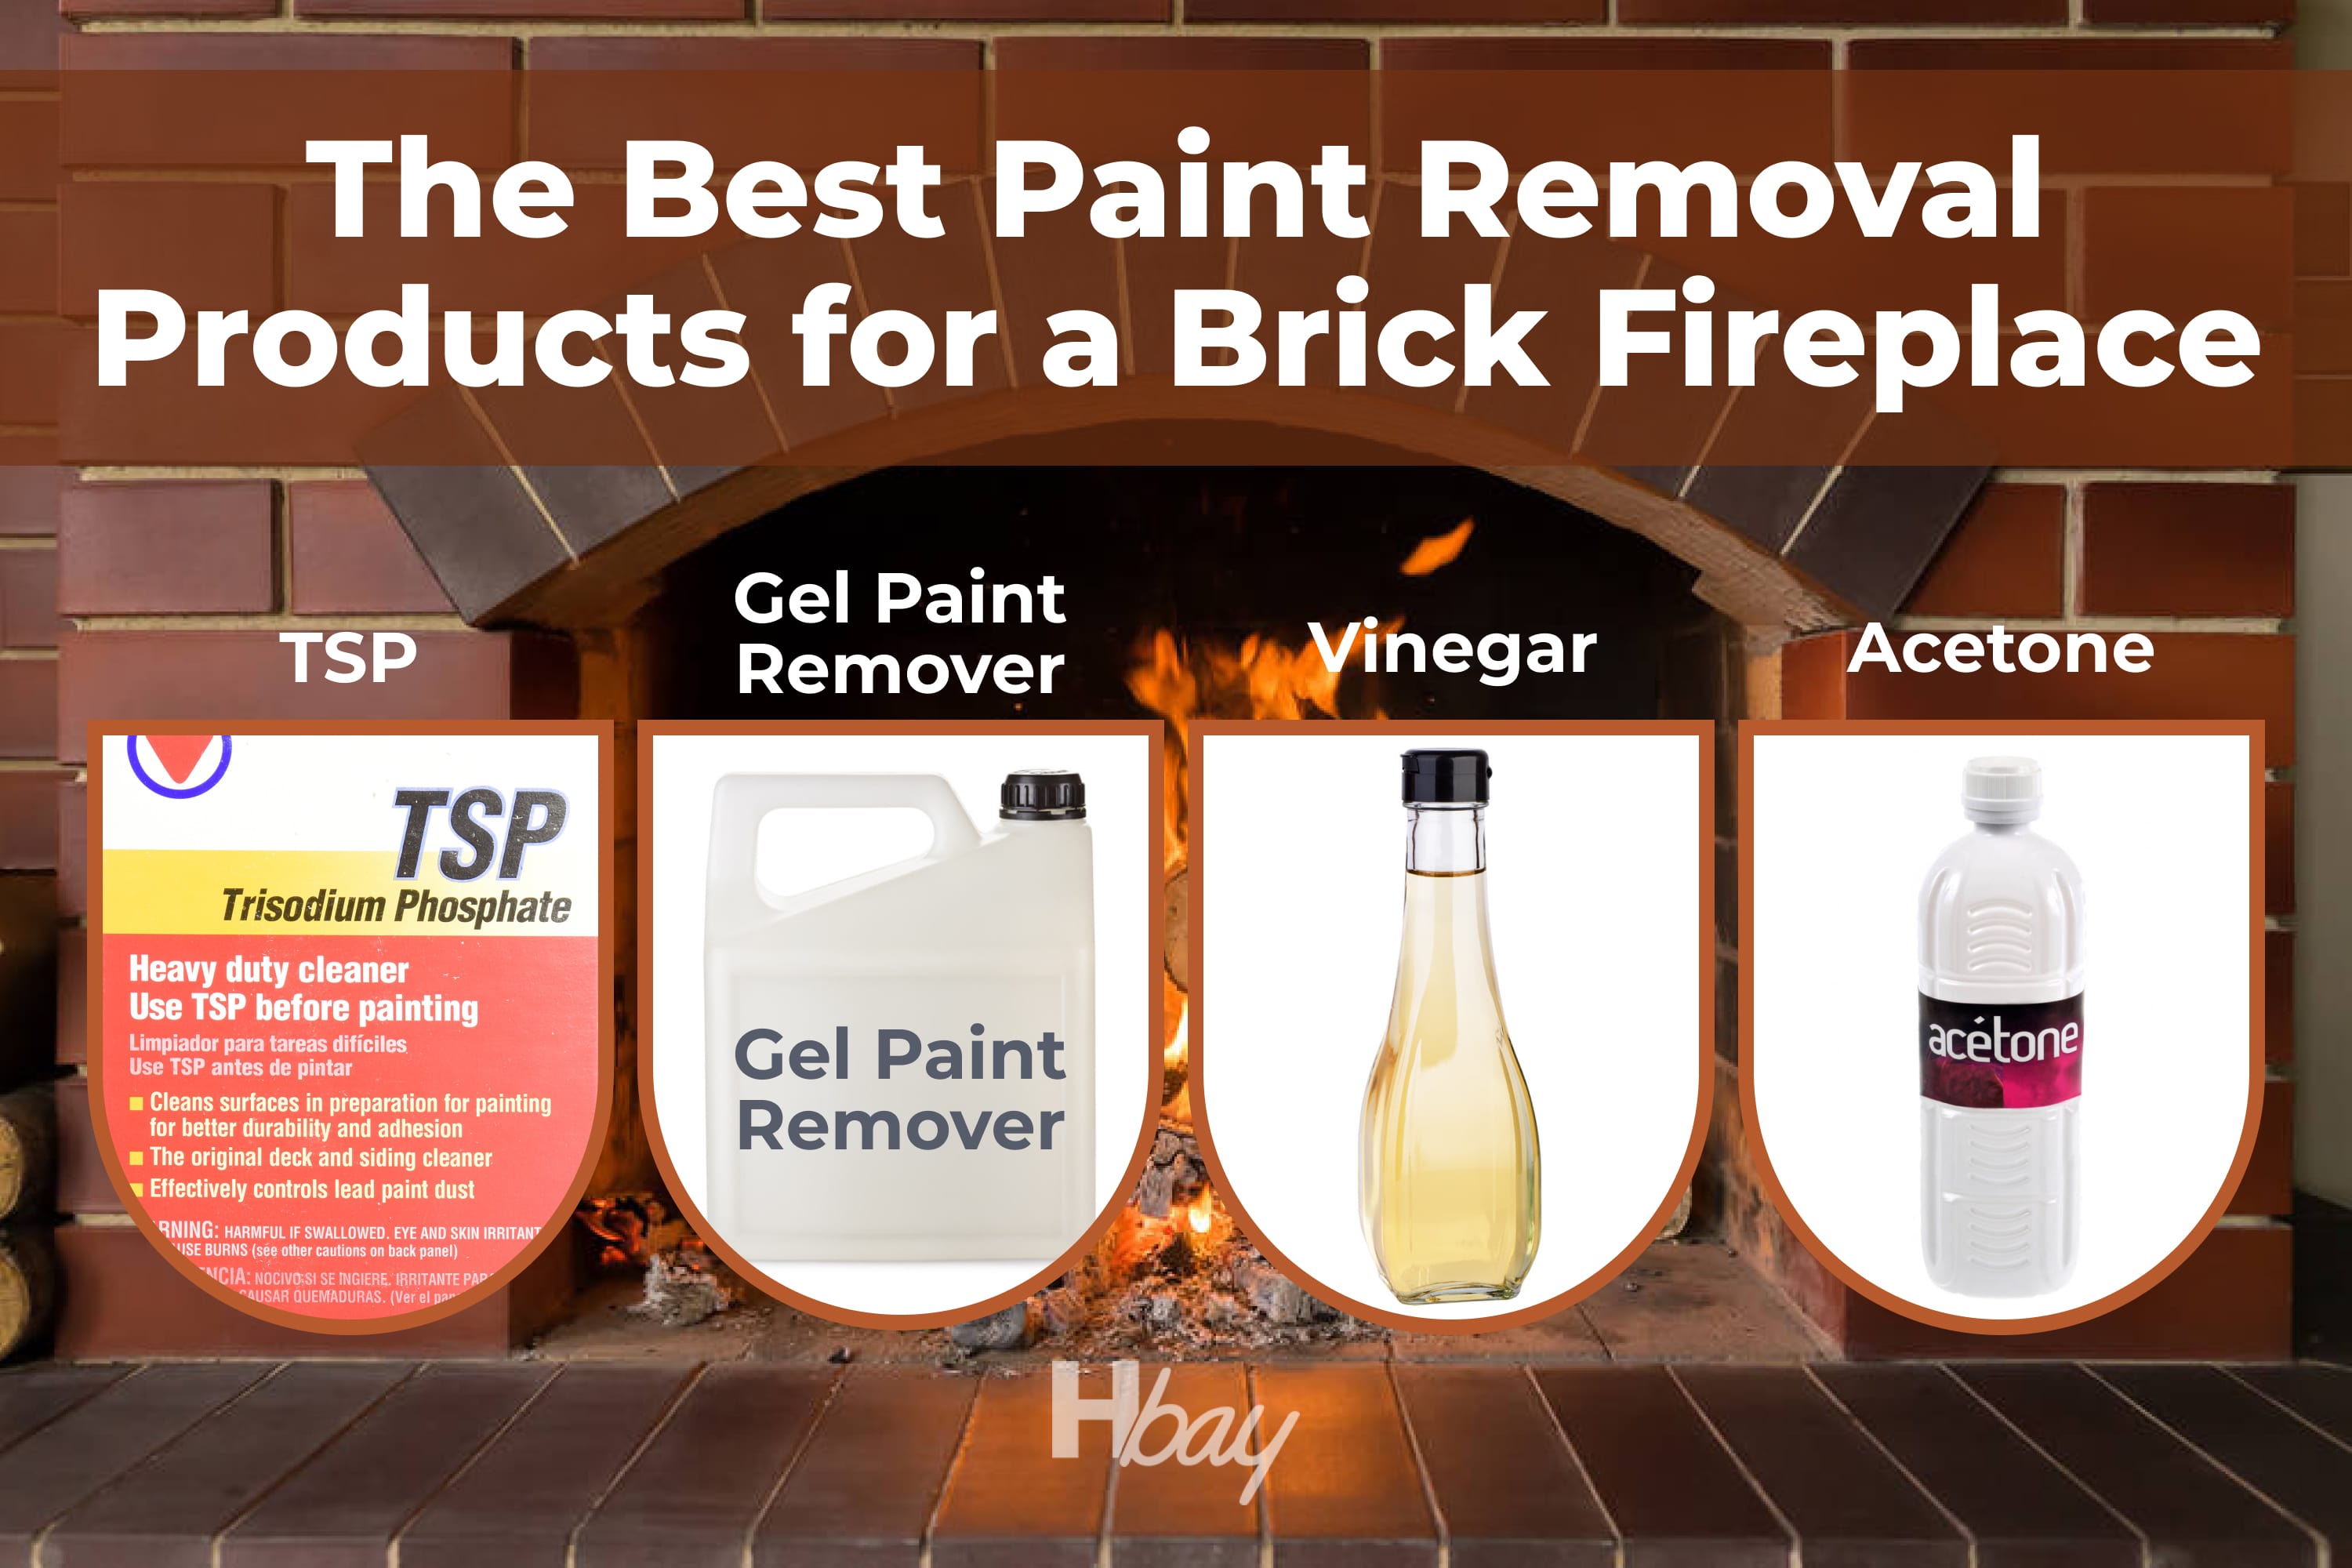 The Best Paint Removal Products for a Brick Fireplace